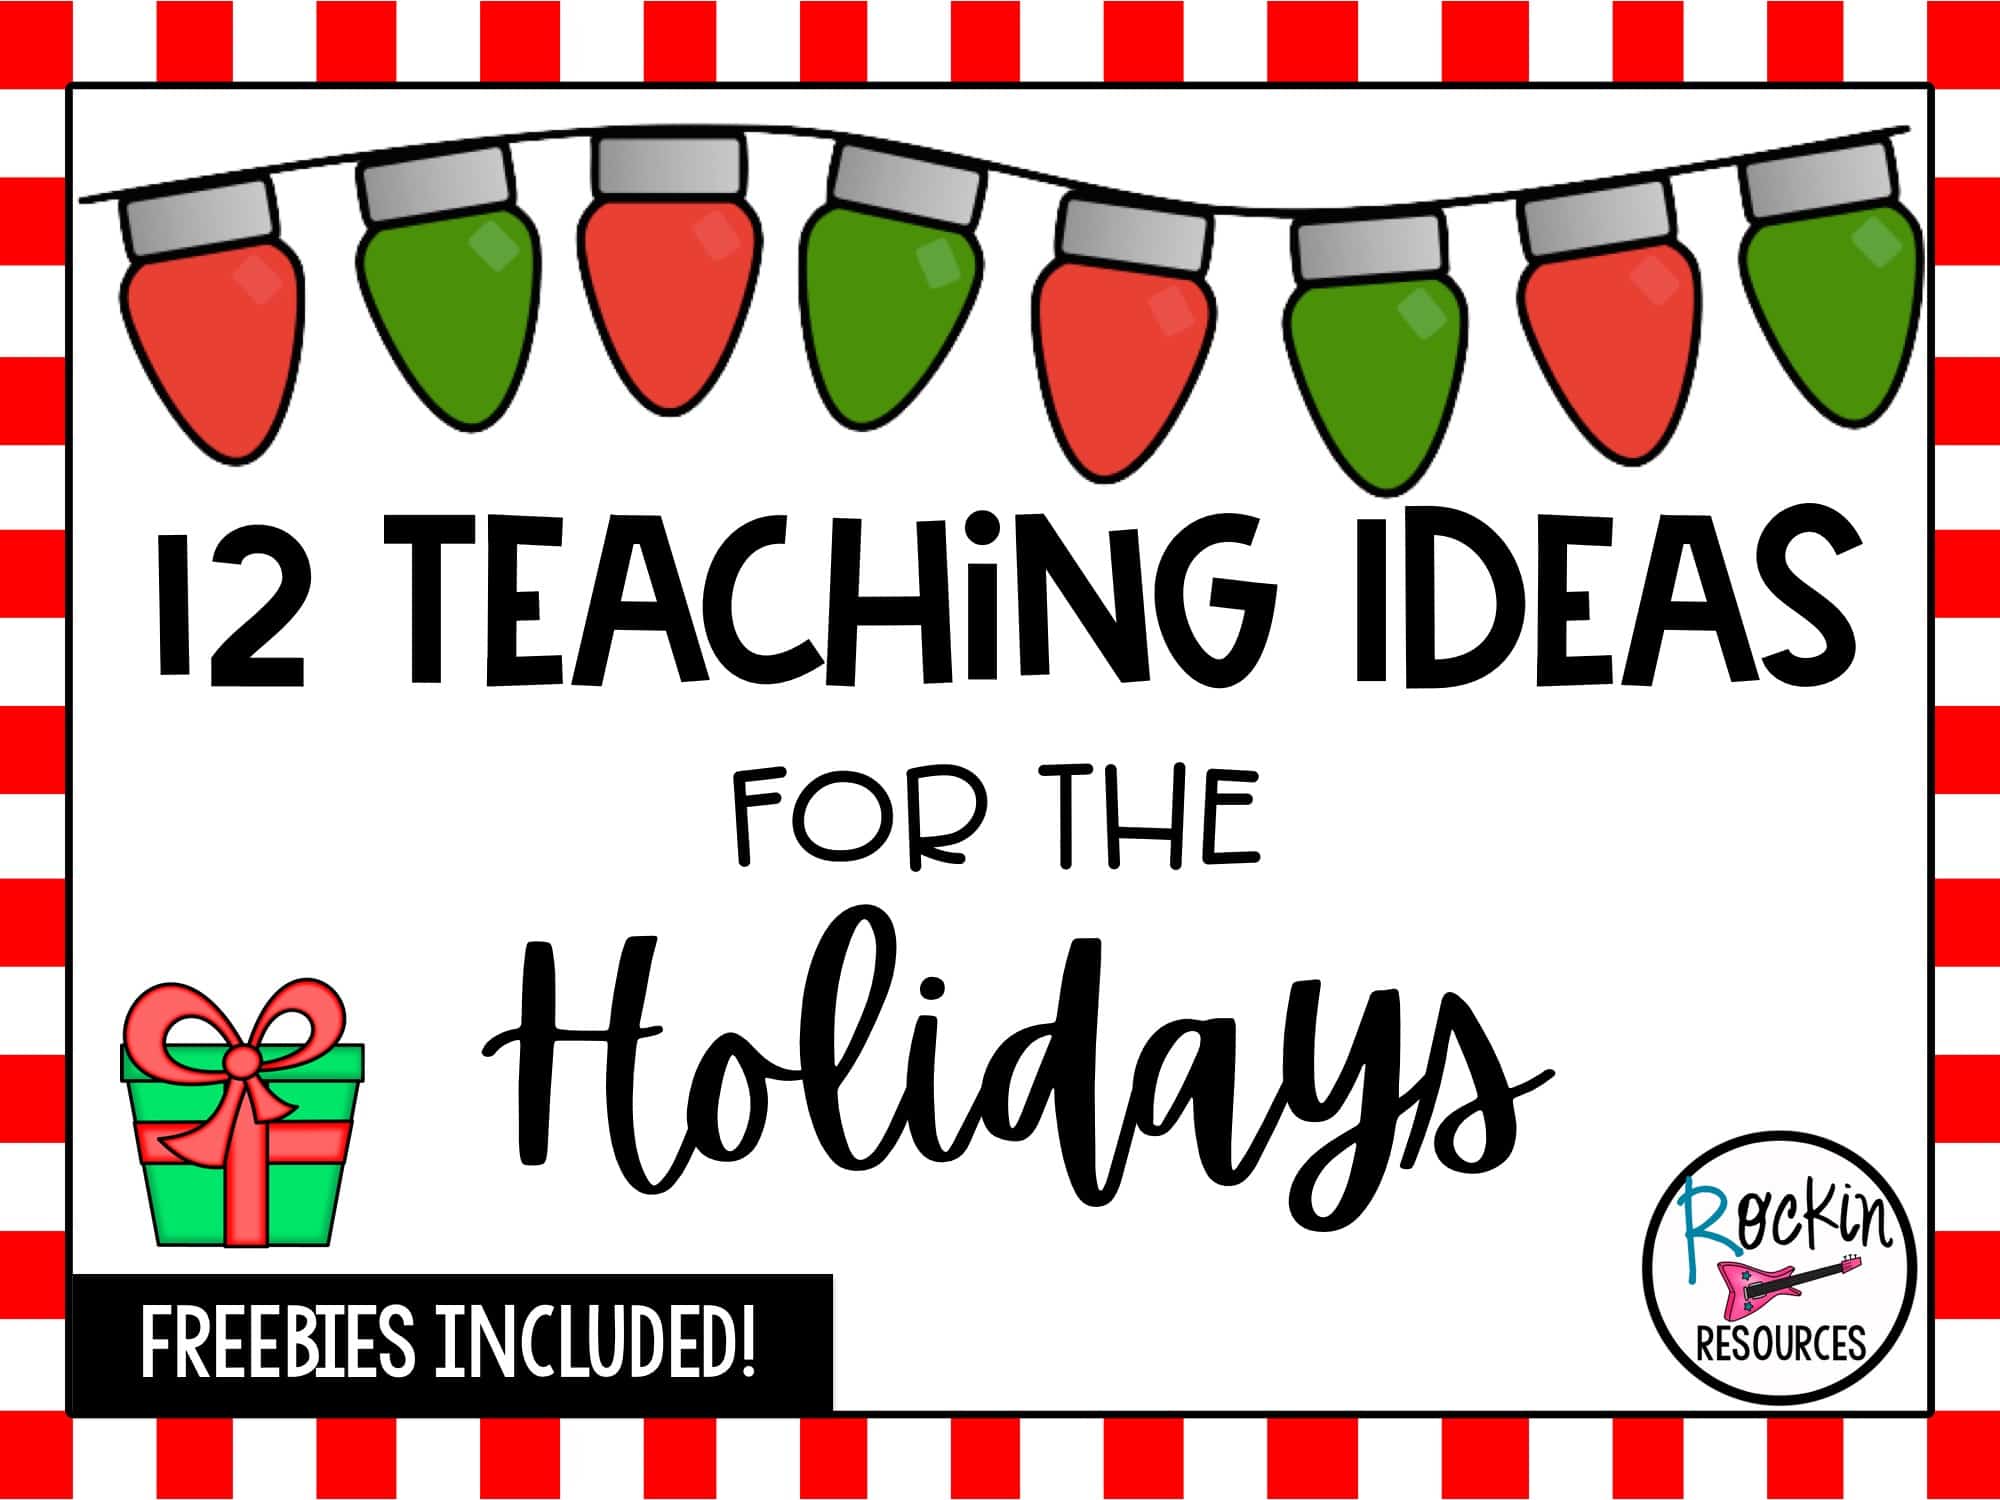 12 Teaching Ideas for the Holidays - Rockin Resources